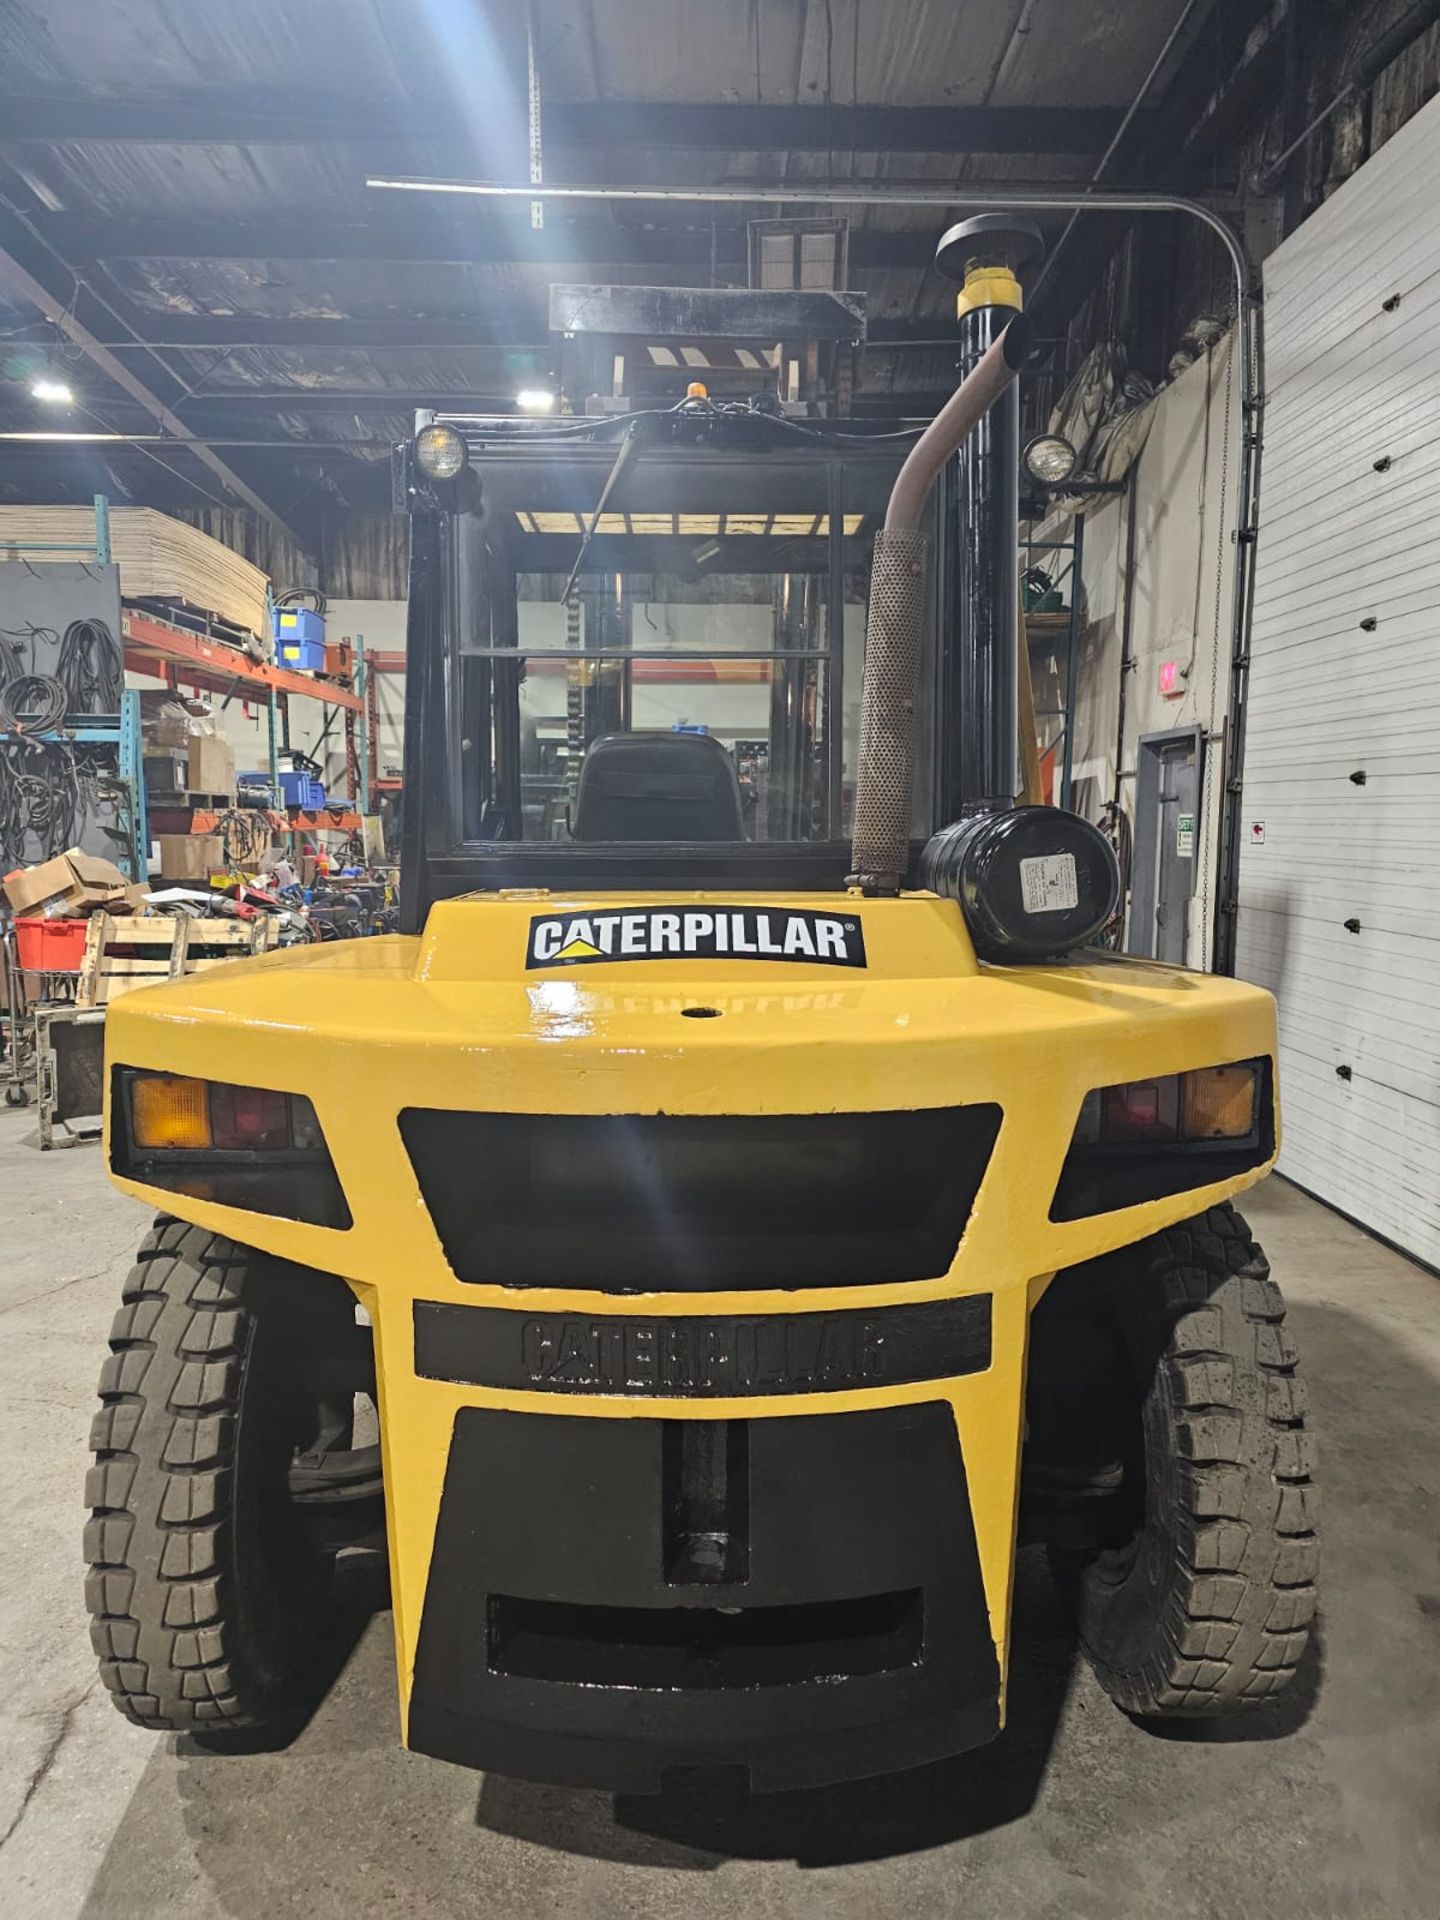 CATERPILLAR 20,000lbs Capacity LPG (Propane) OUTDOOR Forklift with 72" Forks & 146" load height with - Image 7 of 9